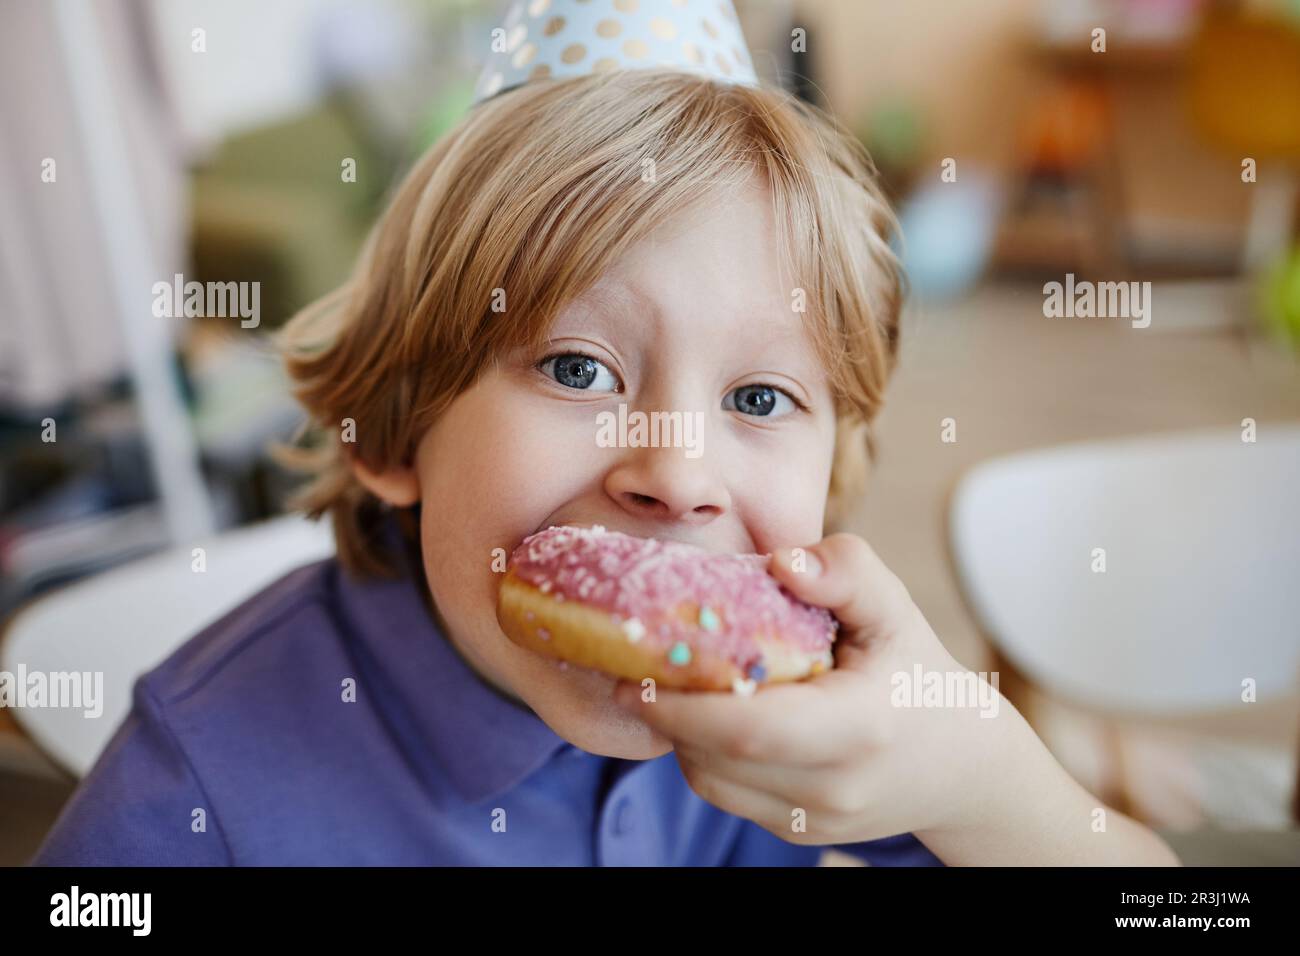 Close-up portrait of blonde little boy eating big donut during birthday party and looking at camera Stock Photo